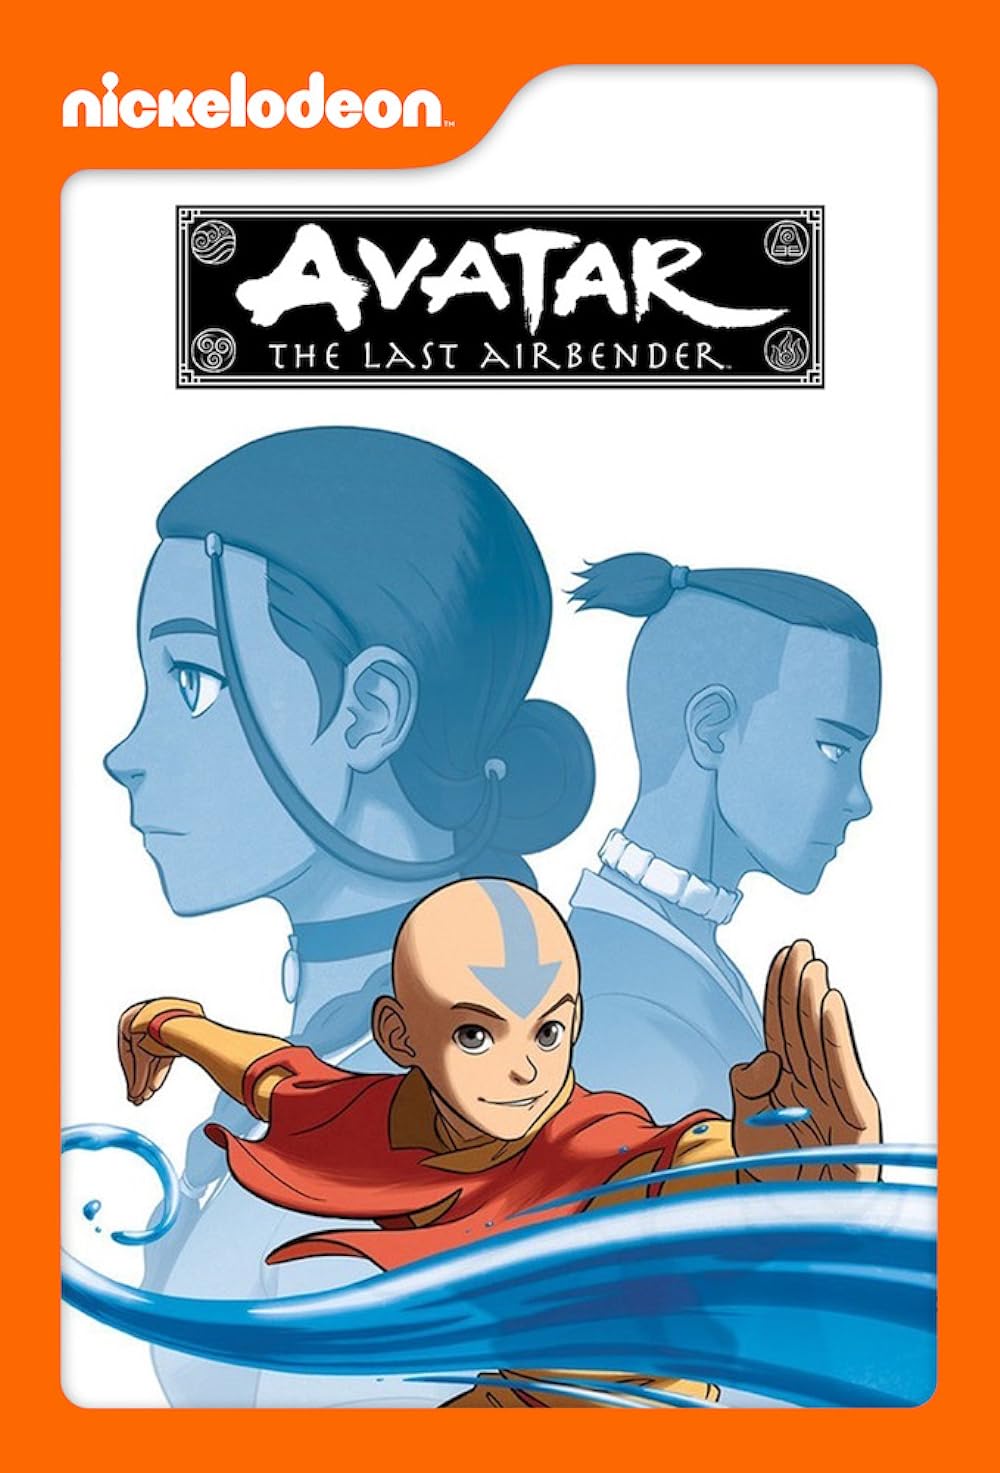 Avatar: The Last Air Bender (February 22) - NetflixThe live-action adaptation of the animated series focuses on the adventures of Aang and his friends as they fight to save the world by defeating the Fire Nation. The 10-episode series will be released on Netflix on February 22.